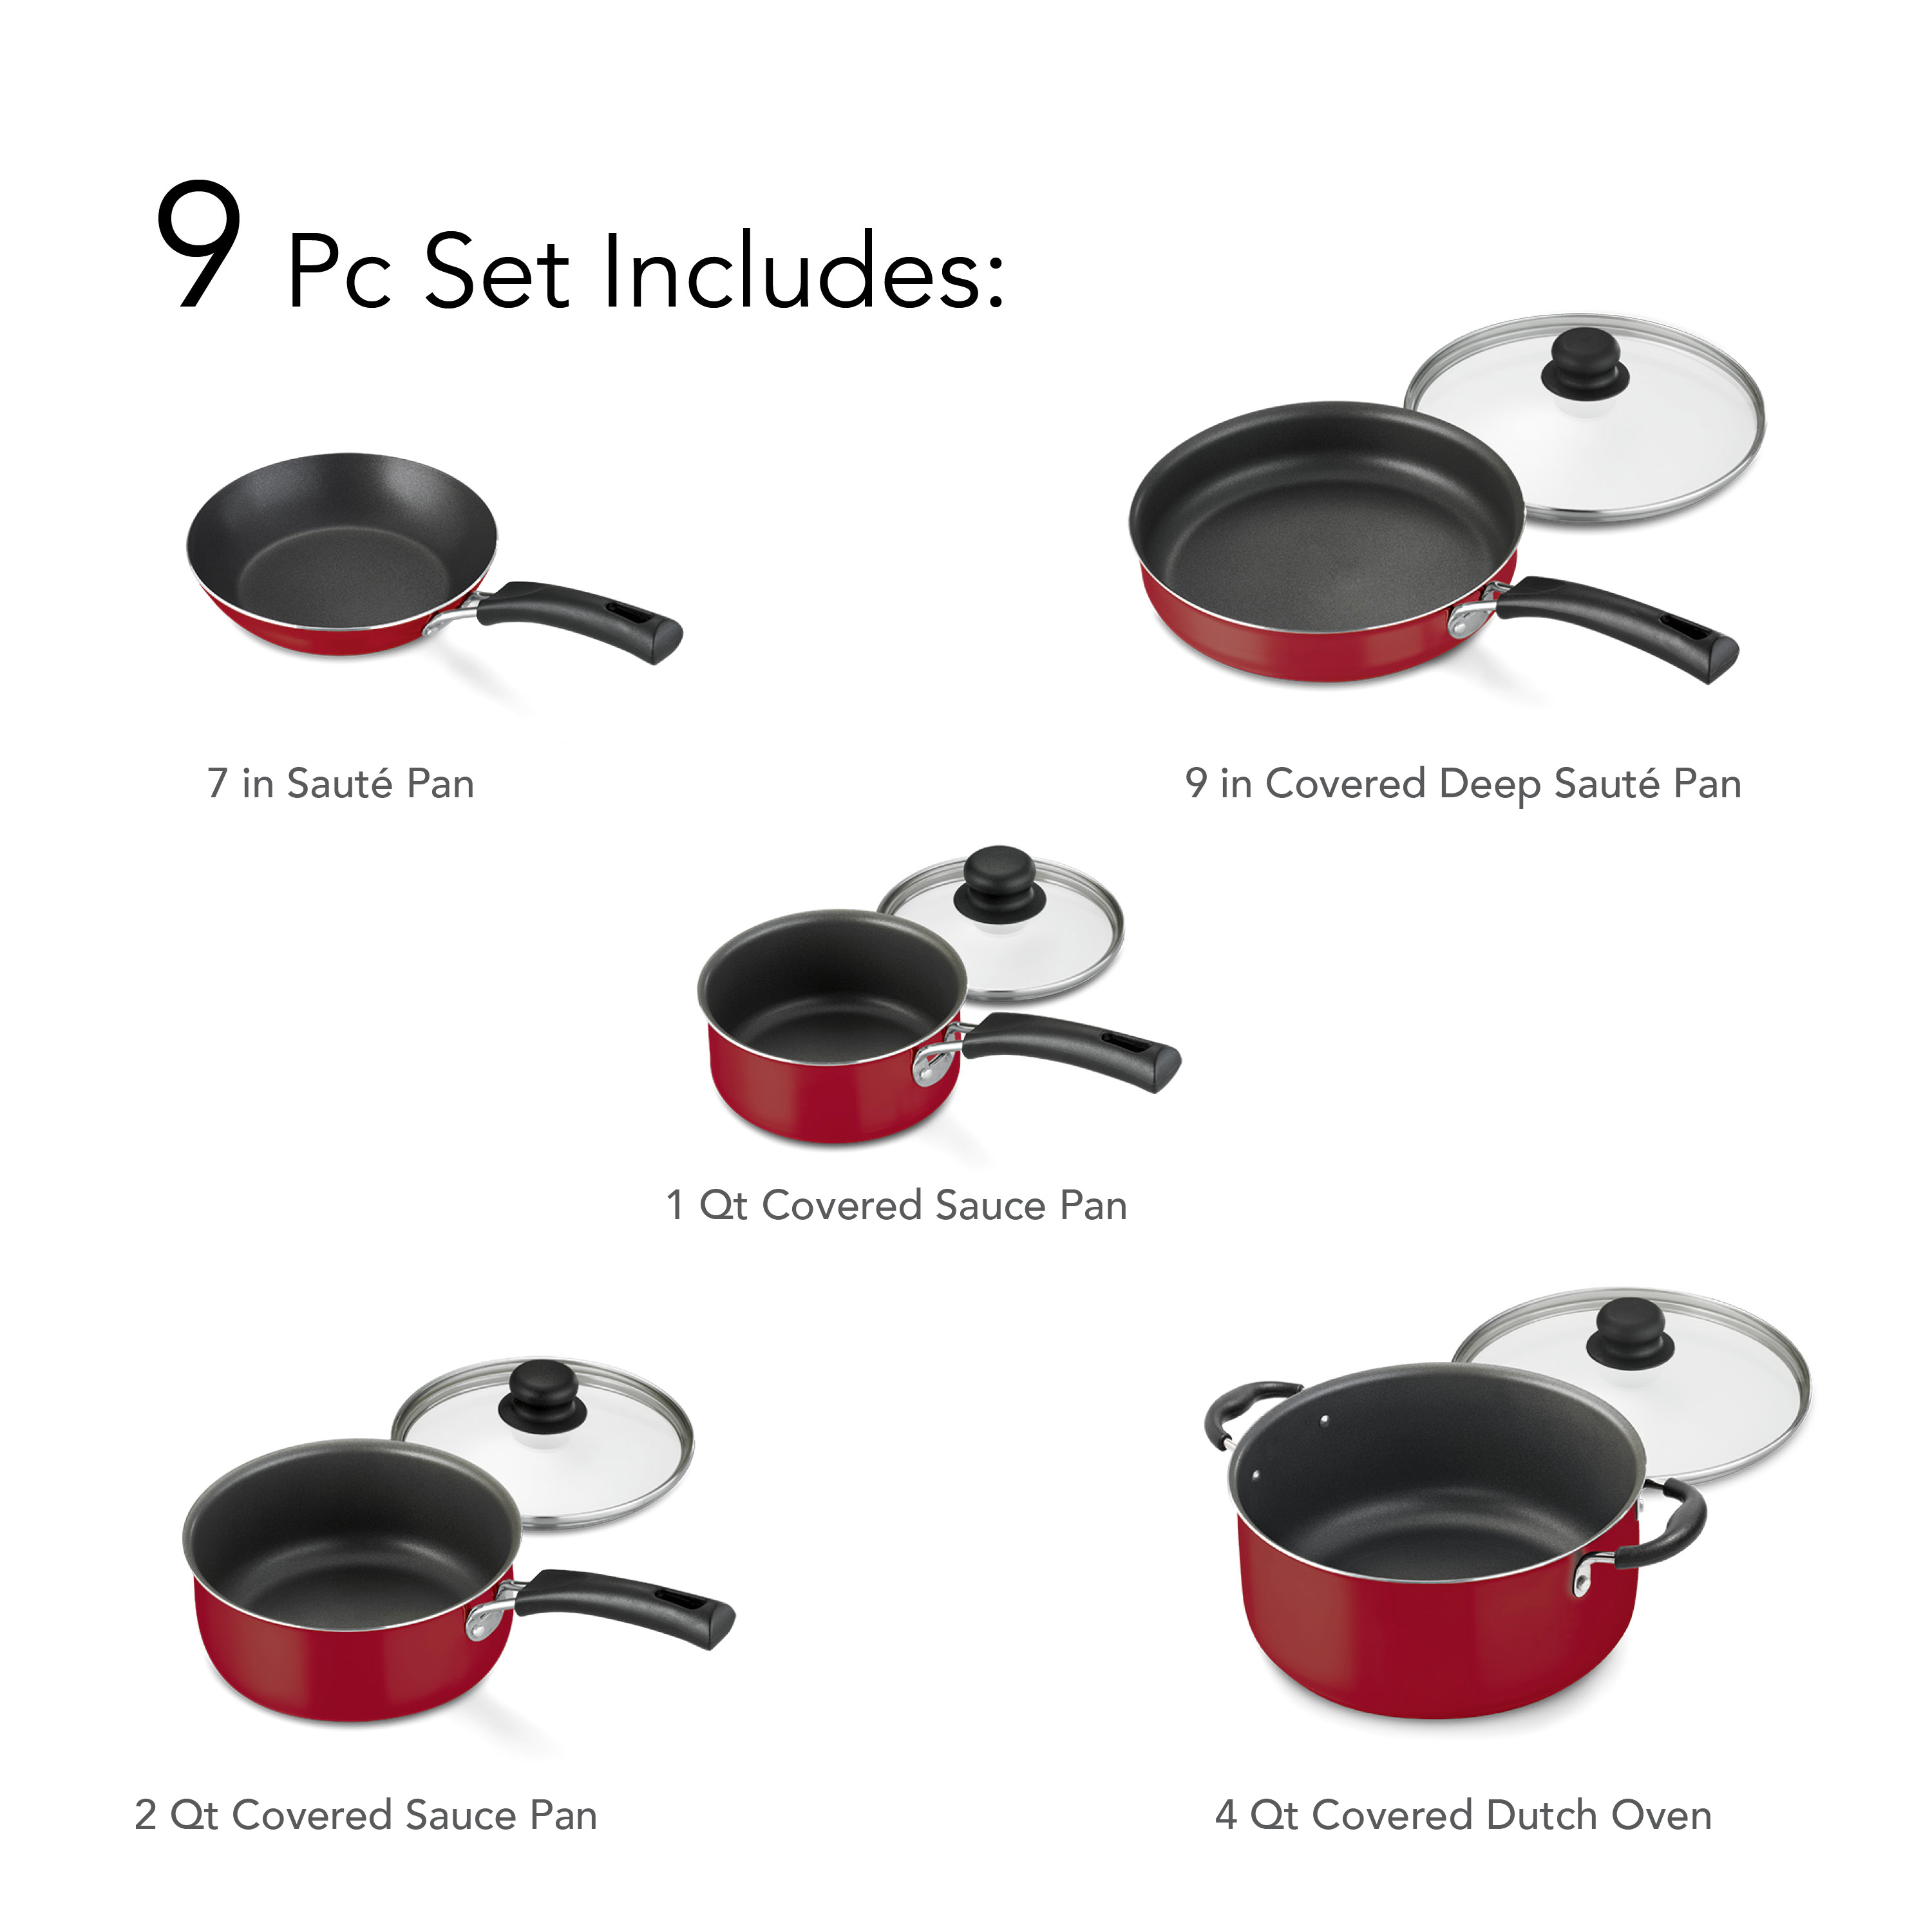 Tramontina 9-Piece Non-stick Cookware Set, Red - image 5 of 6